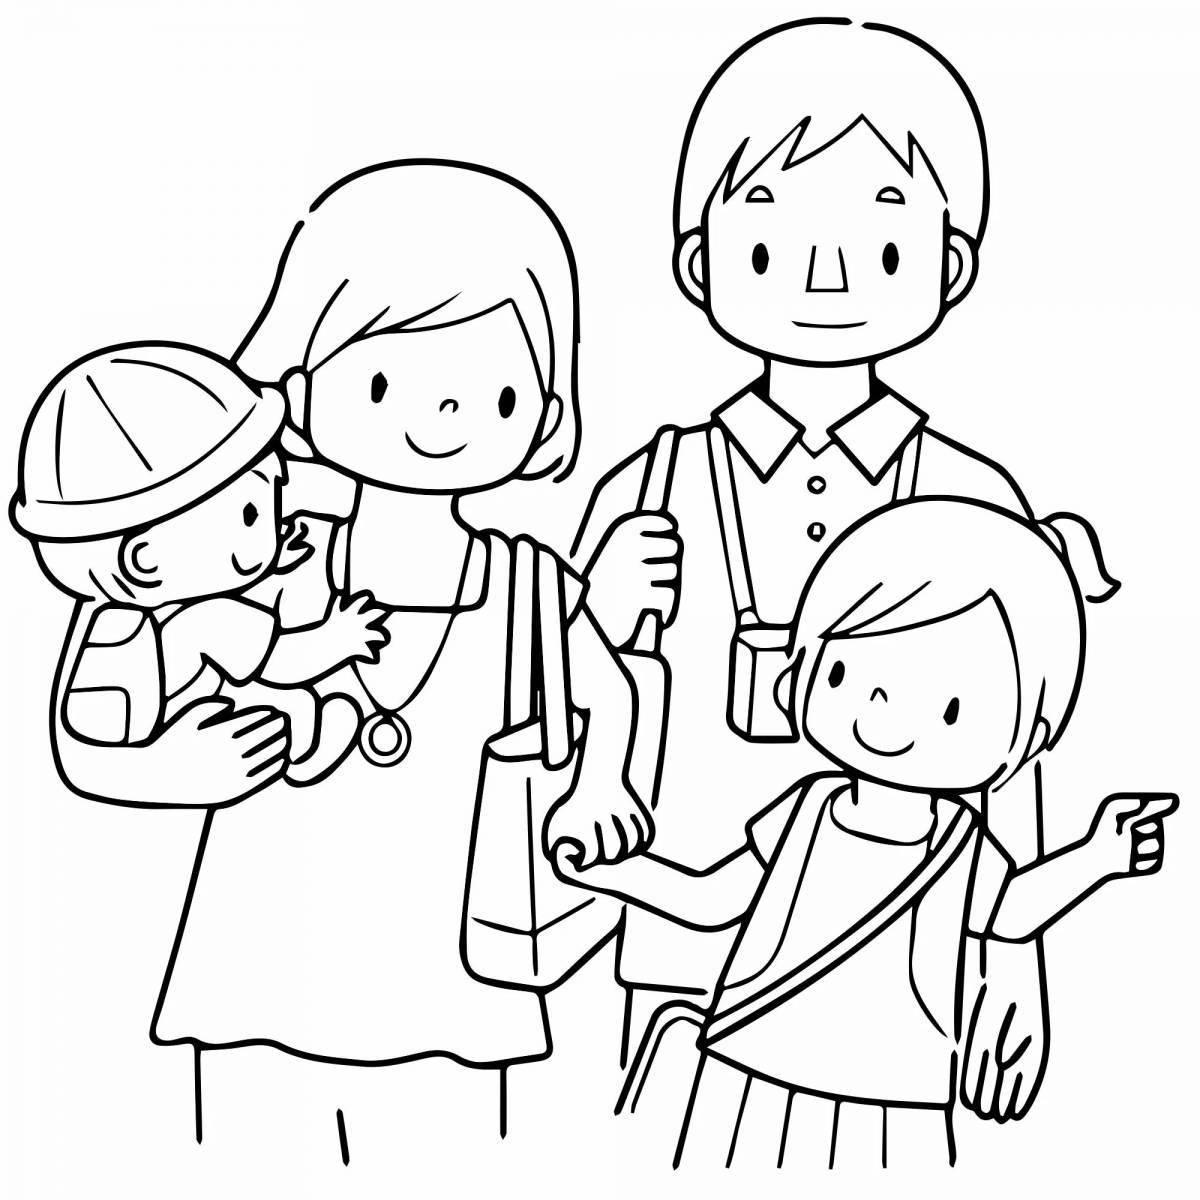 A fun family coloring book for 6-7 year olds